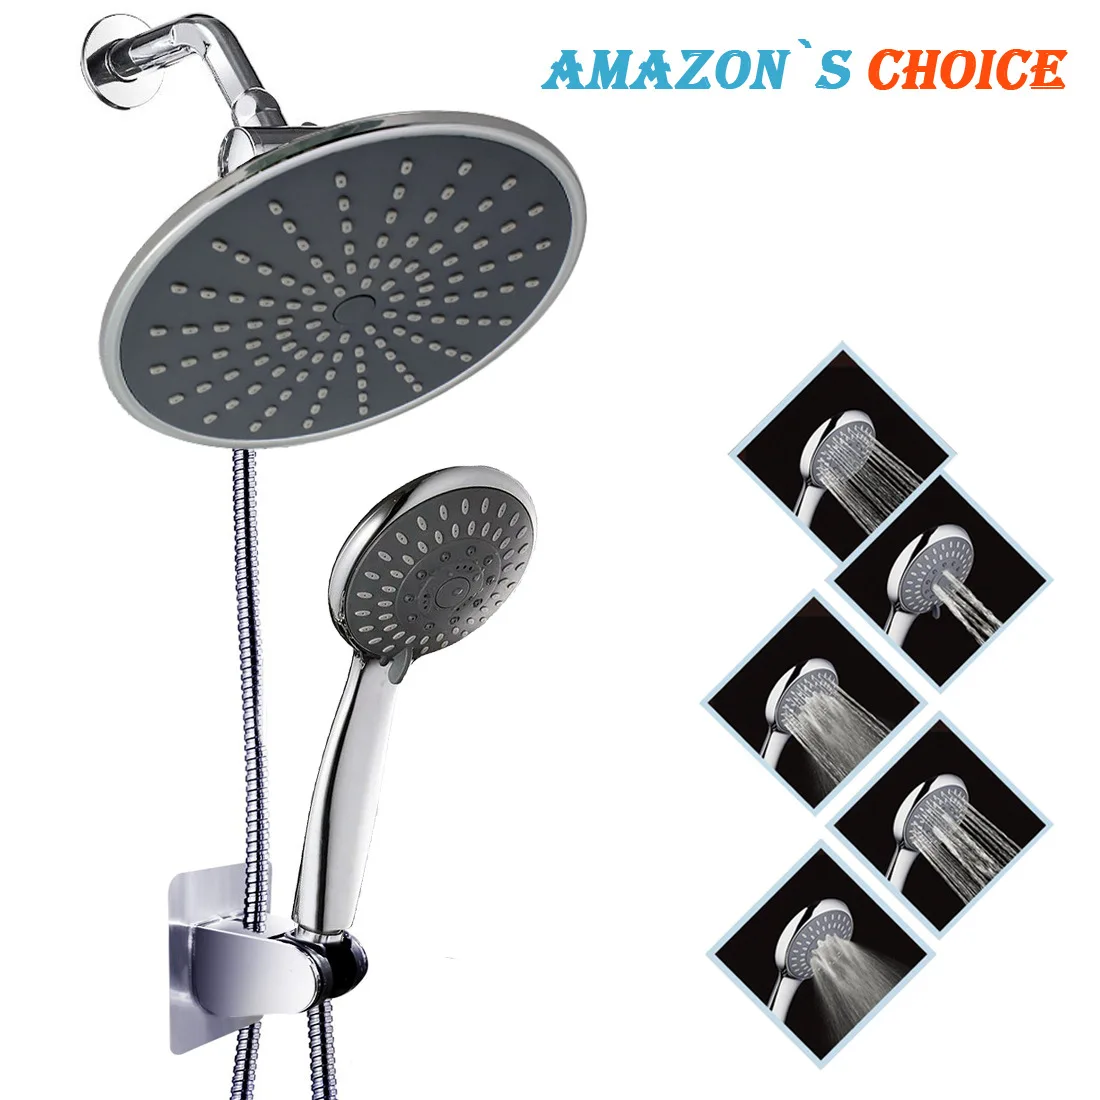 

Shower System, Bathroom Rainfall Shower System Set Complete with 5-Setting Handheld Shower Head Combo